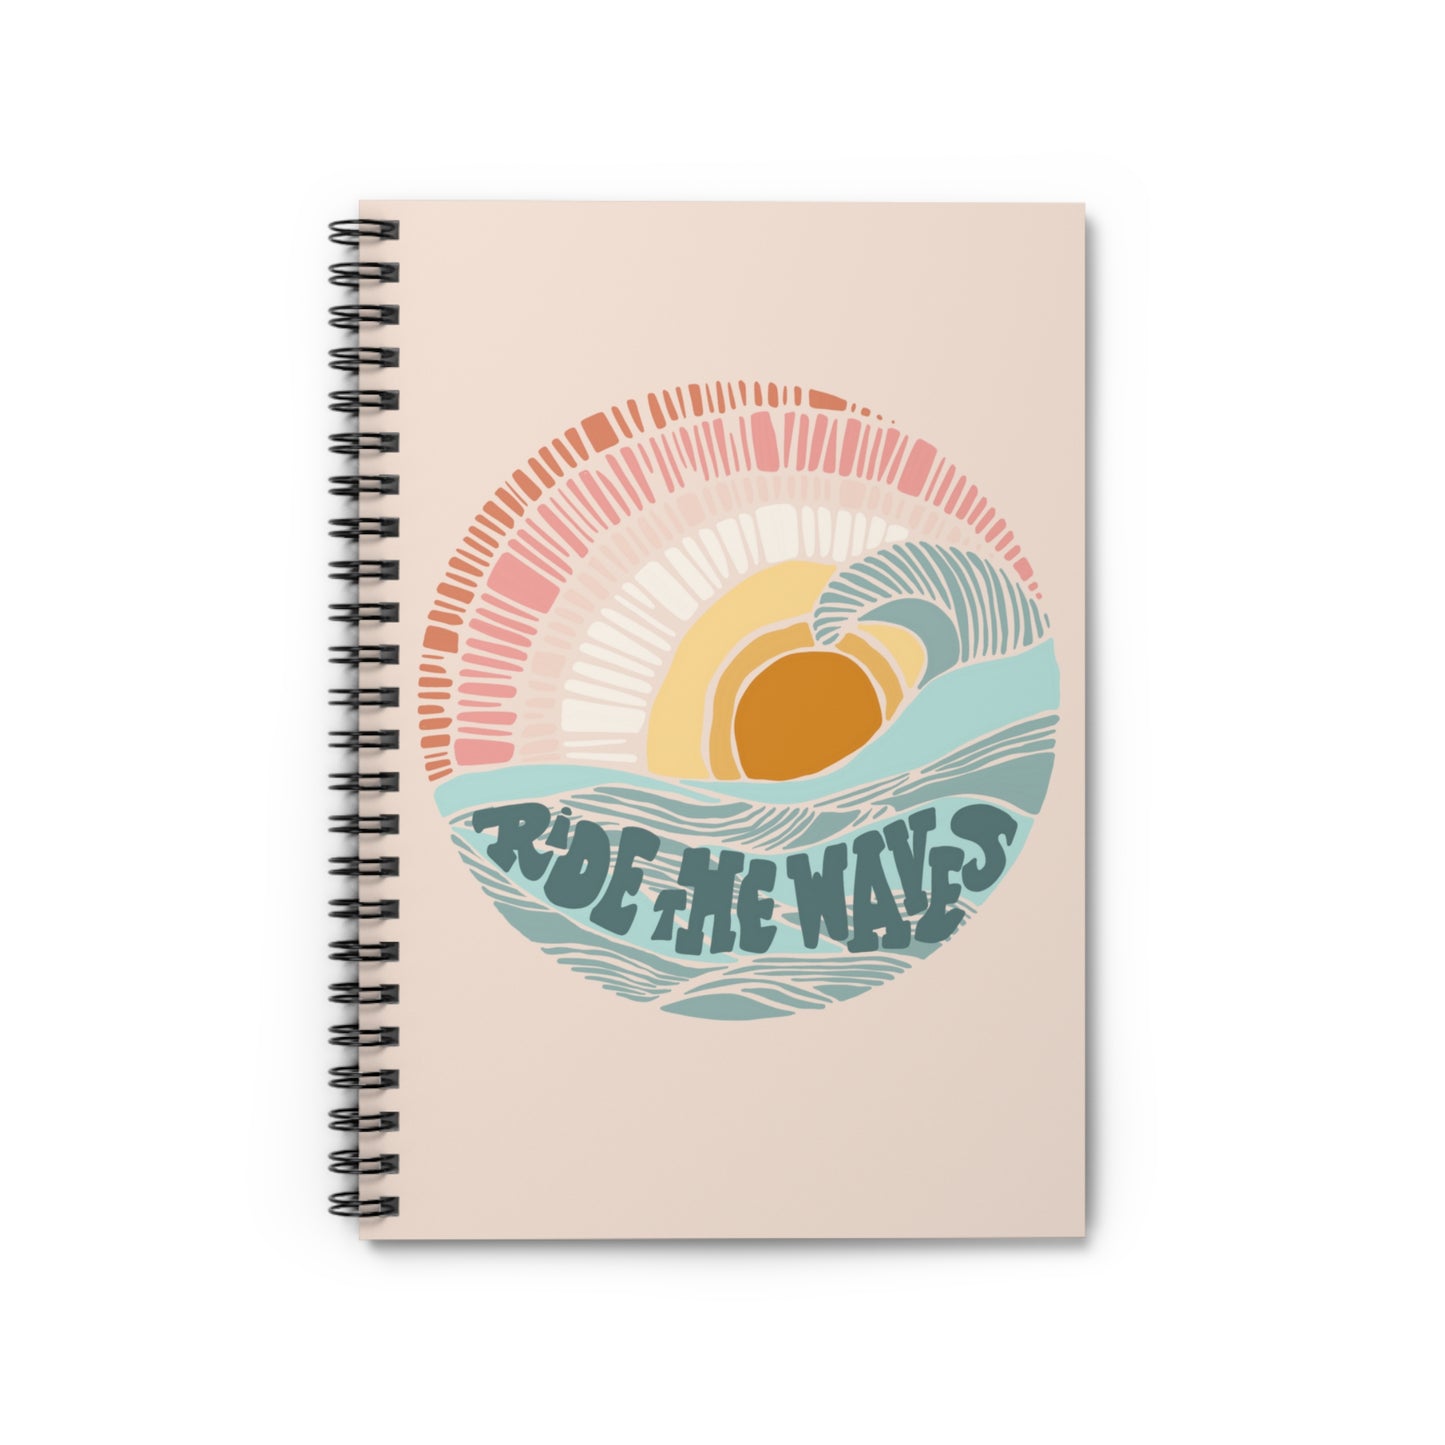 Ride the Waves Spiral Notebook - Ruled Line